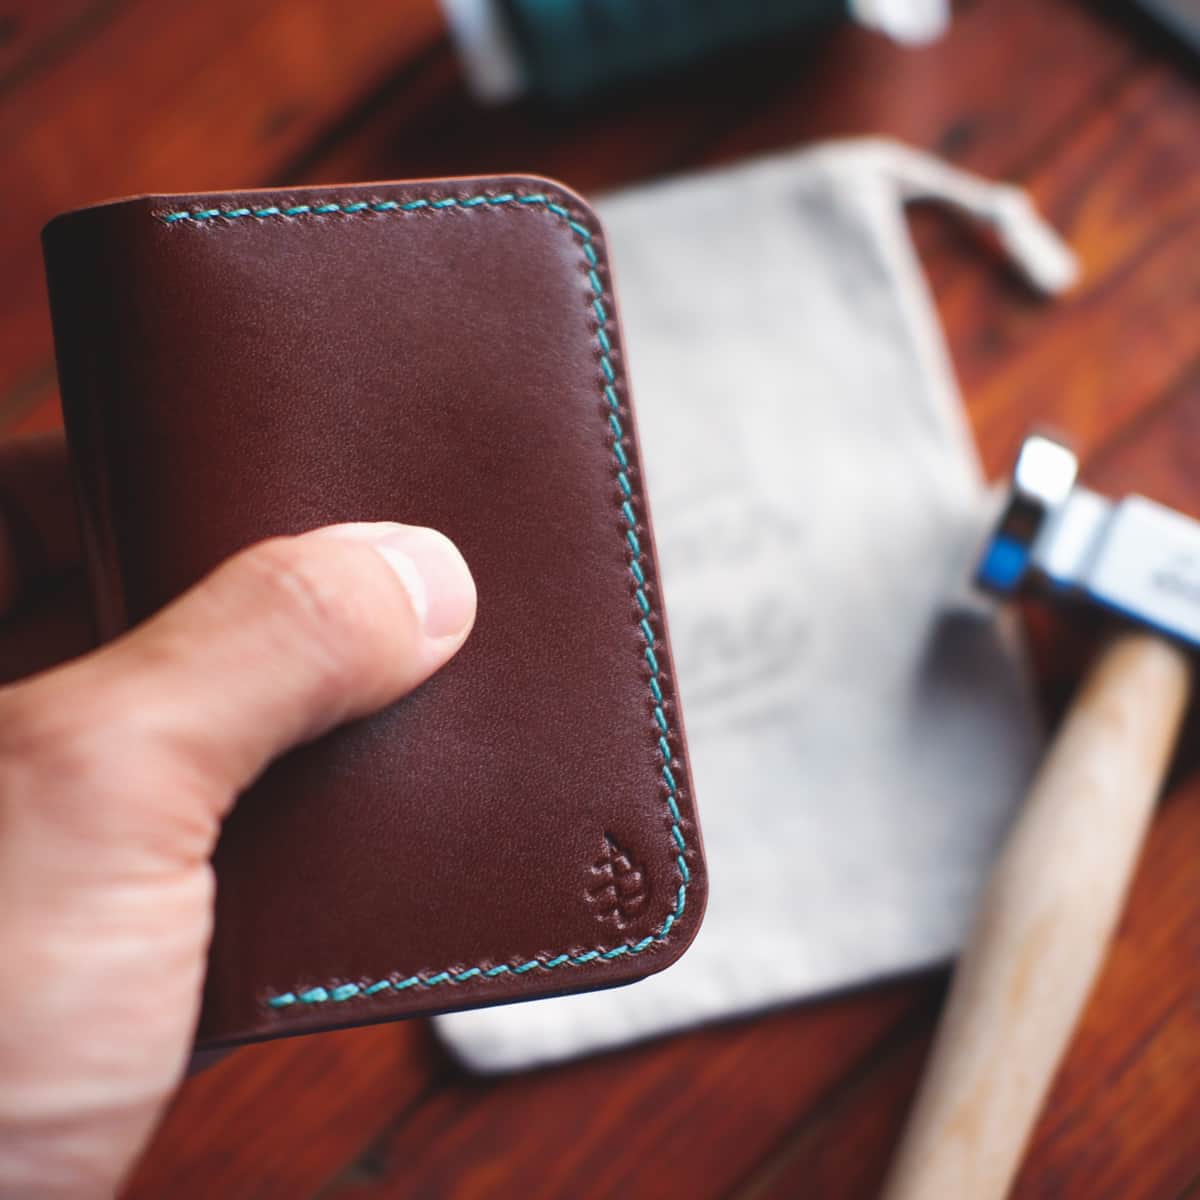 The Monterey Slim Bifold in Firenze Lux vegetable tanned leather held in hand